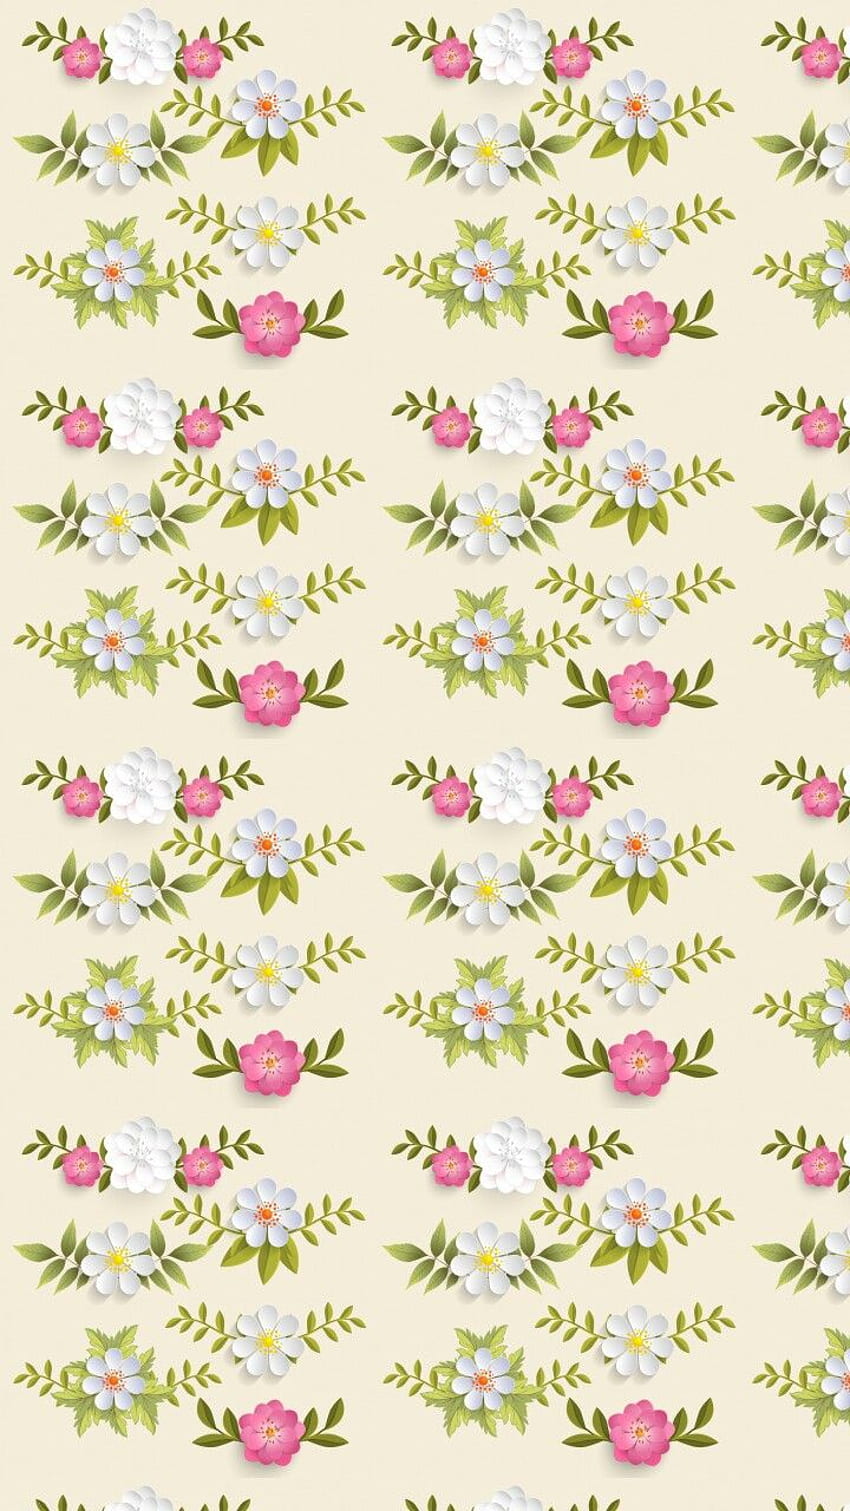 art, background, cartoon, colorful, colour, cute art, design, drawing, flora, flowers, green, illustration, iphone, kawaii, leaves, pastel, pattern, pink, texture, vintage, , watercolor, we heart it, flowers background, flowers pattern, wallpape HD phone wallpaper